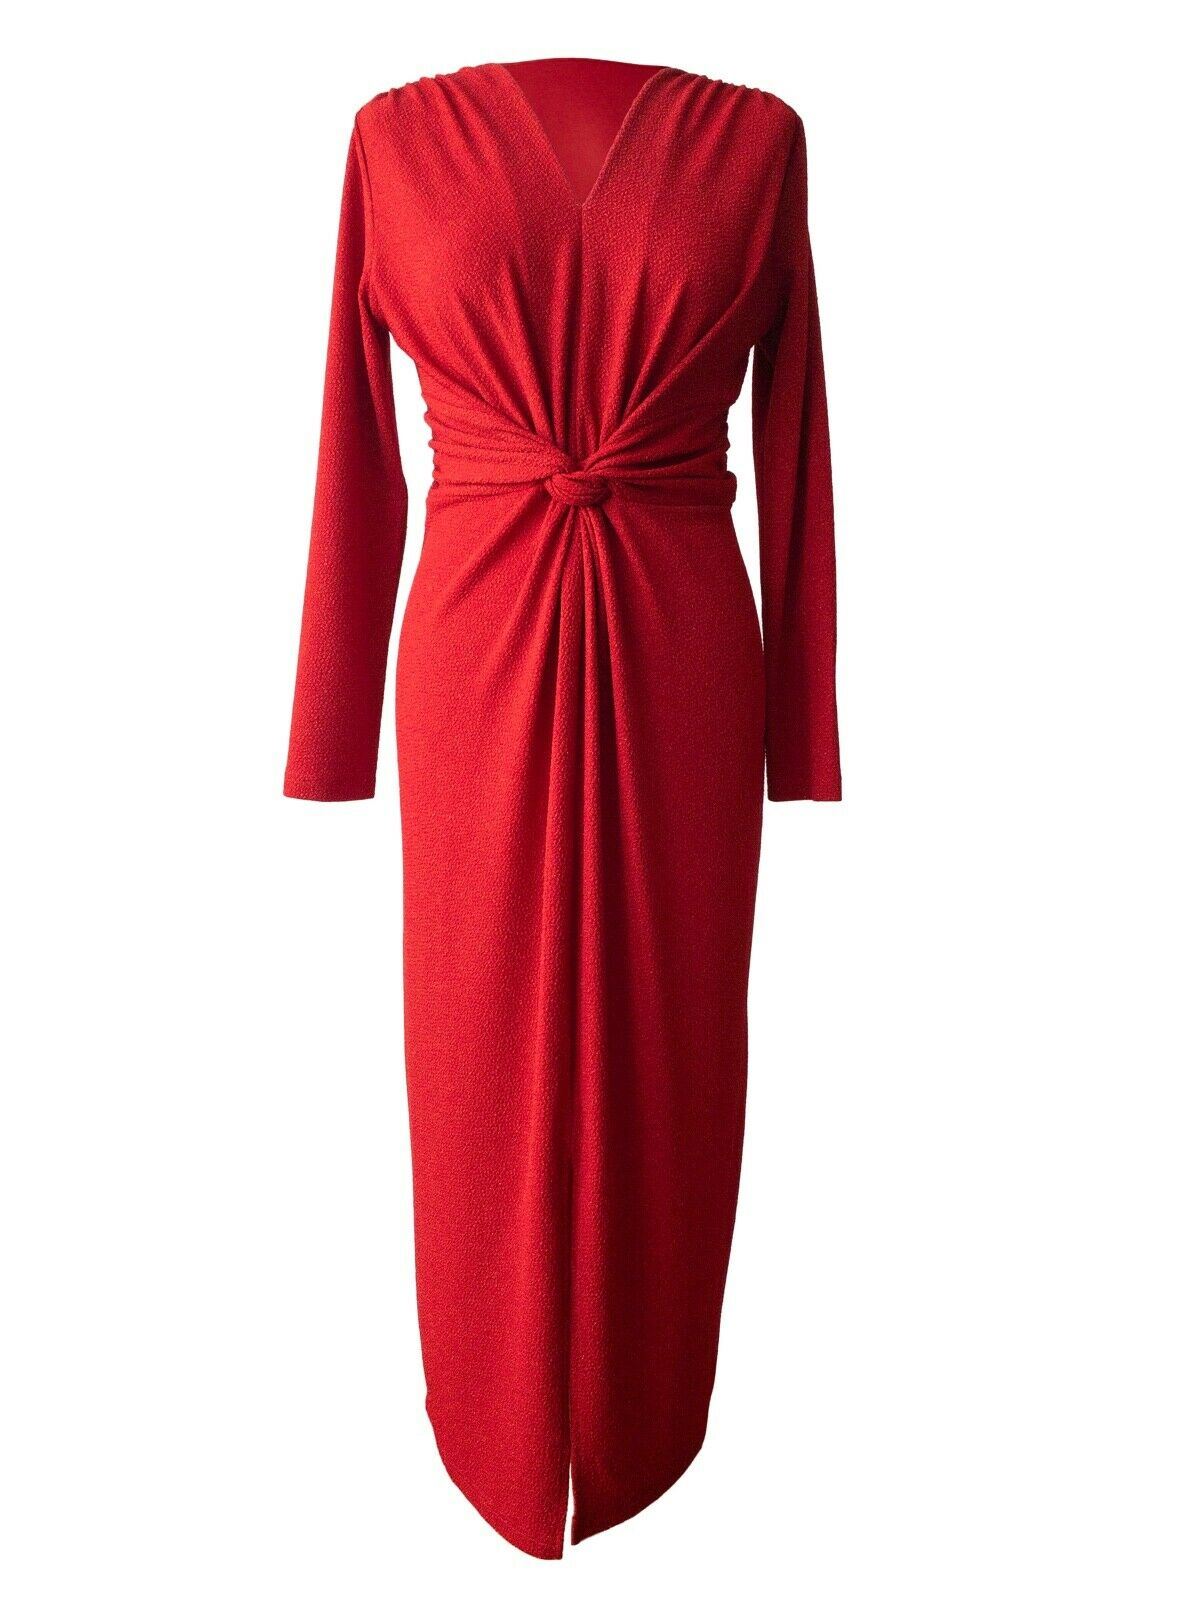 Red Textured Knot Midi Dress Red Metallic Thread Throughout Size 10